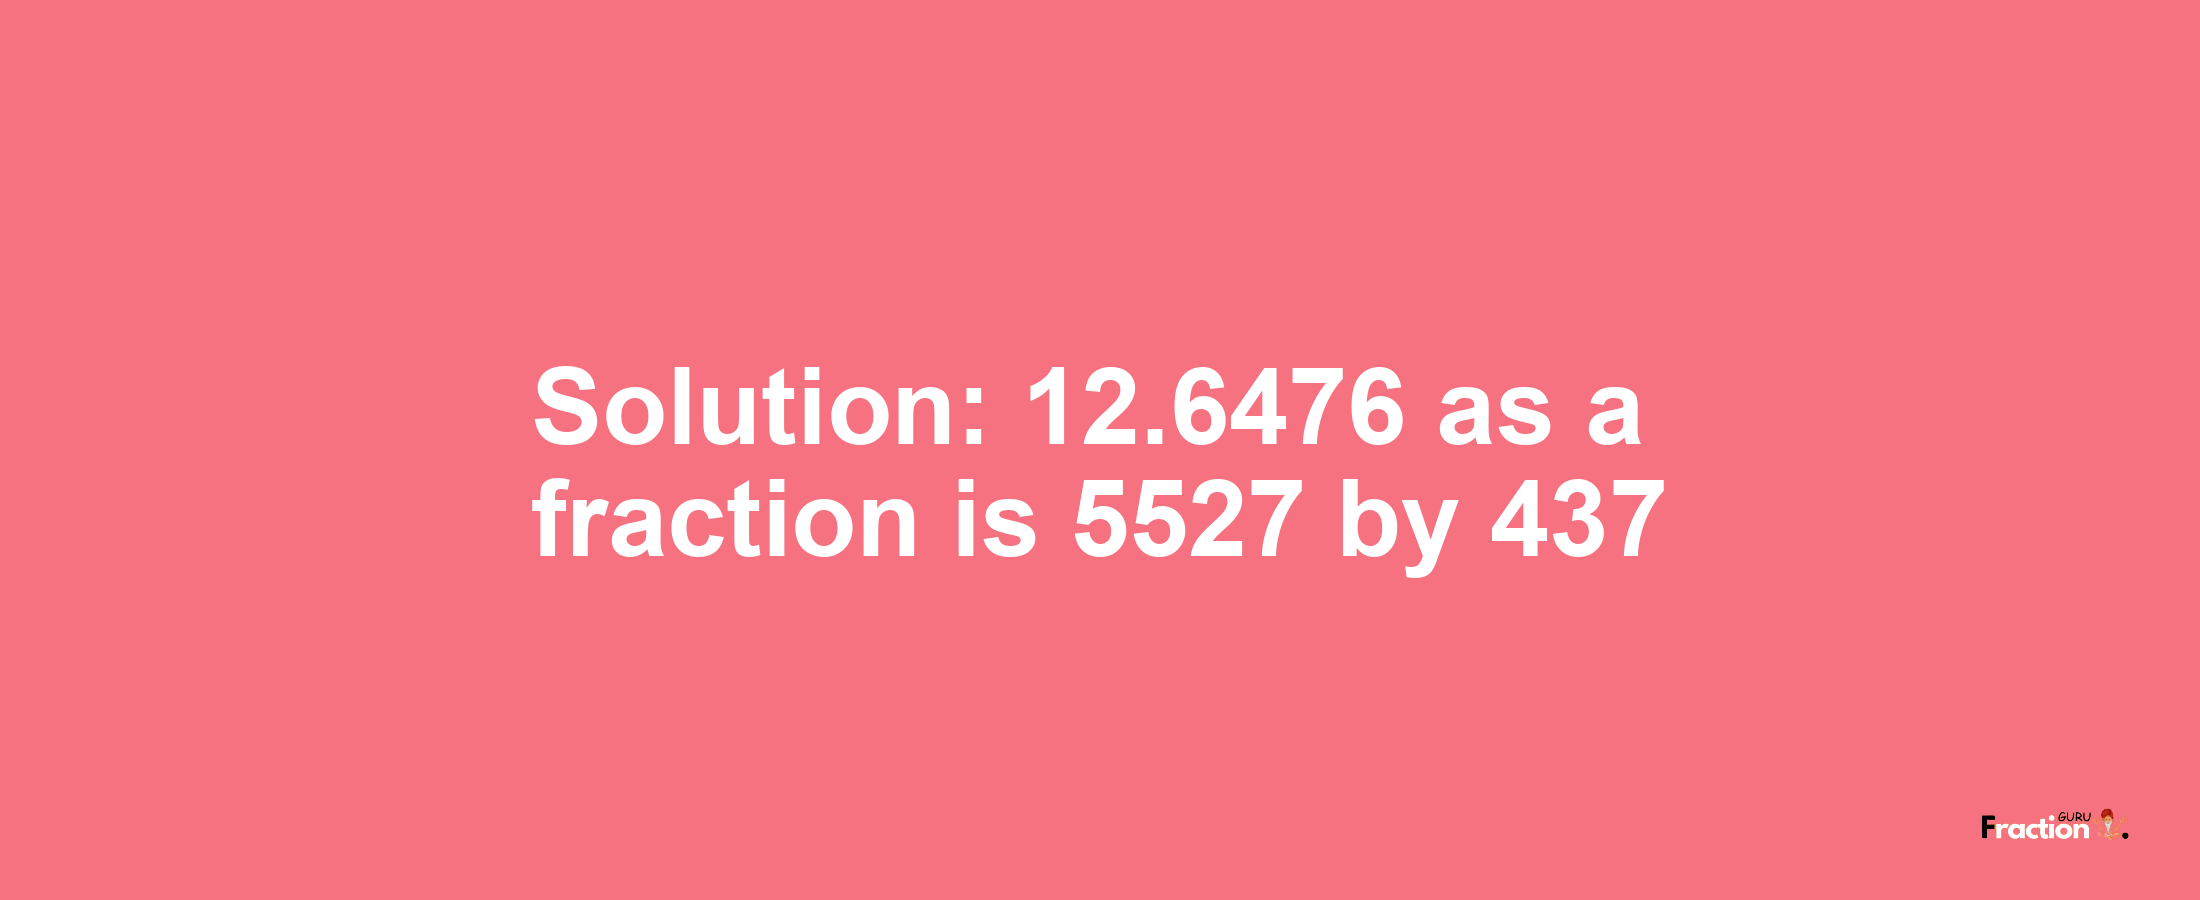 Solution:12.6476 as a fraction is 5527/437